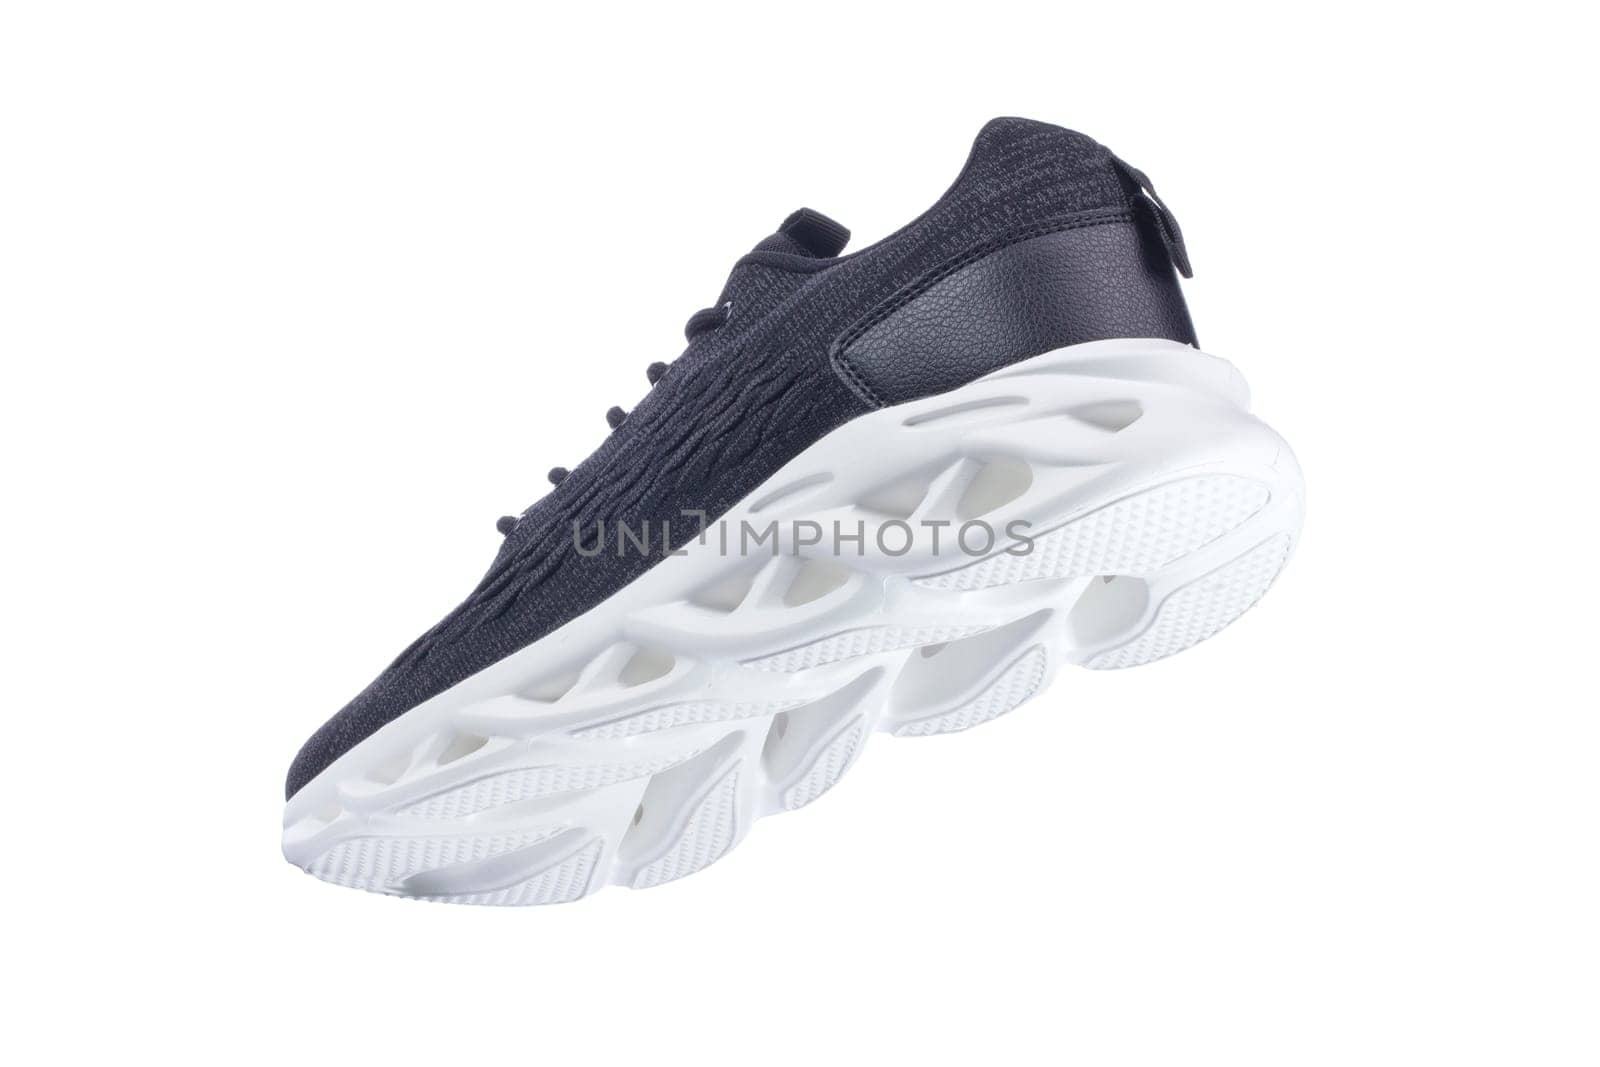 Black sneaker made of fabric with a white sole on a white shoe.